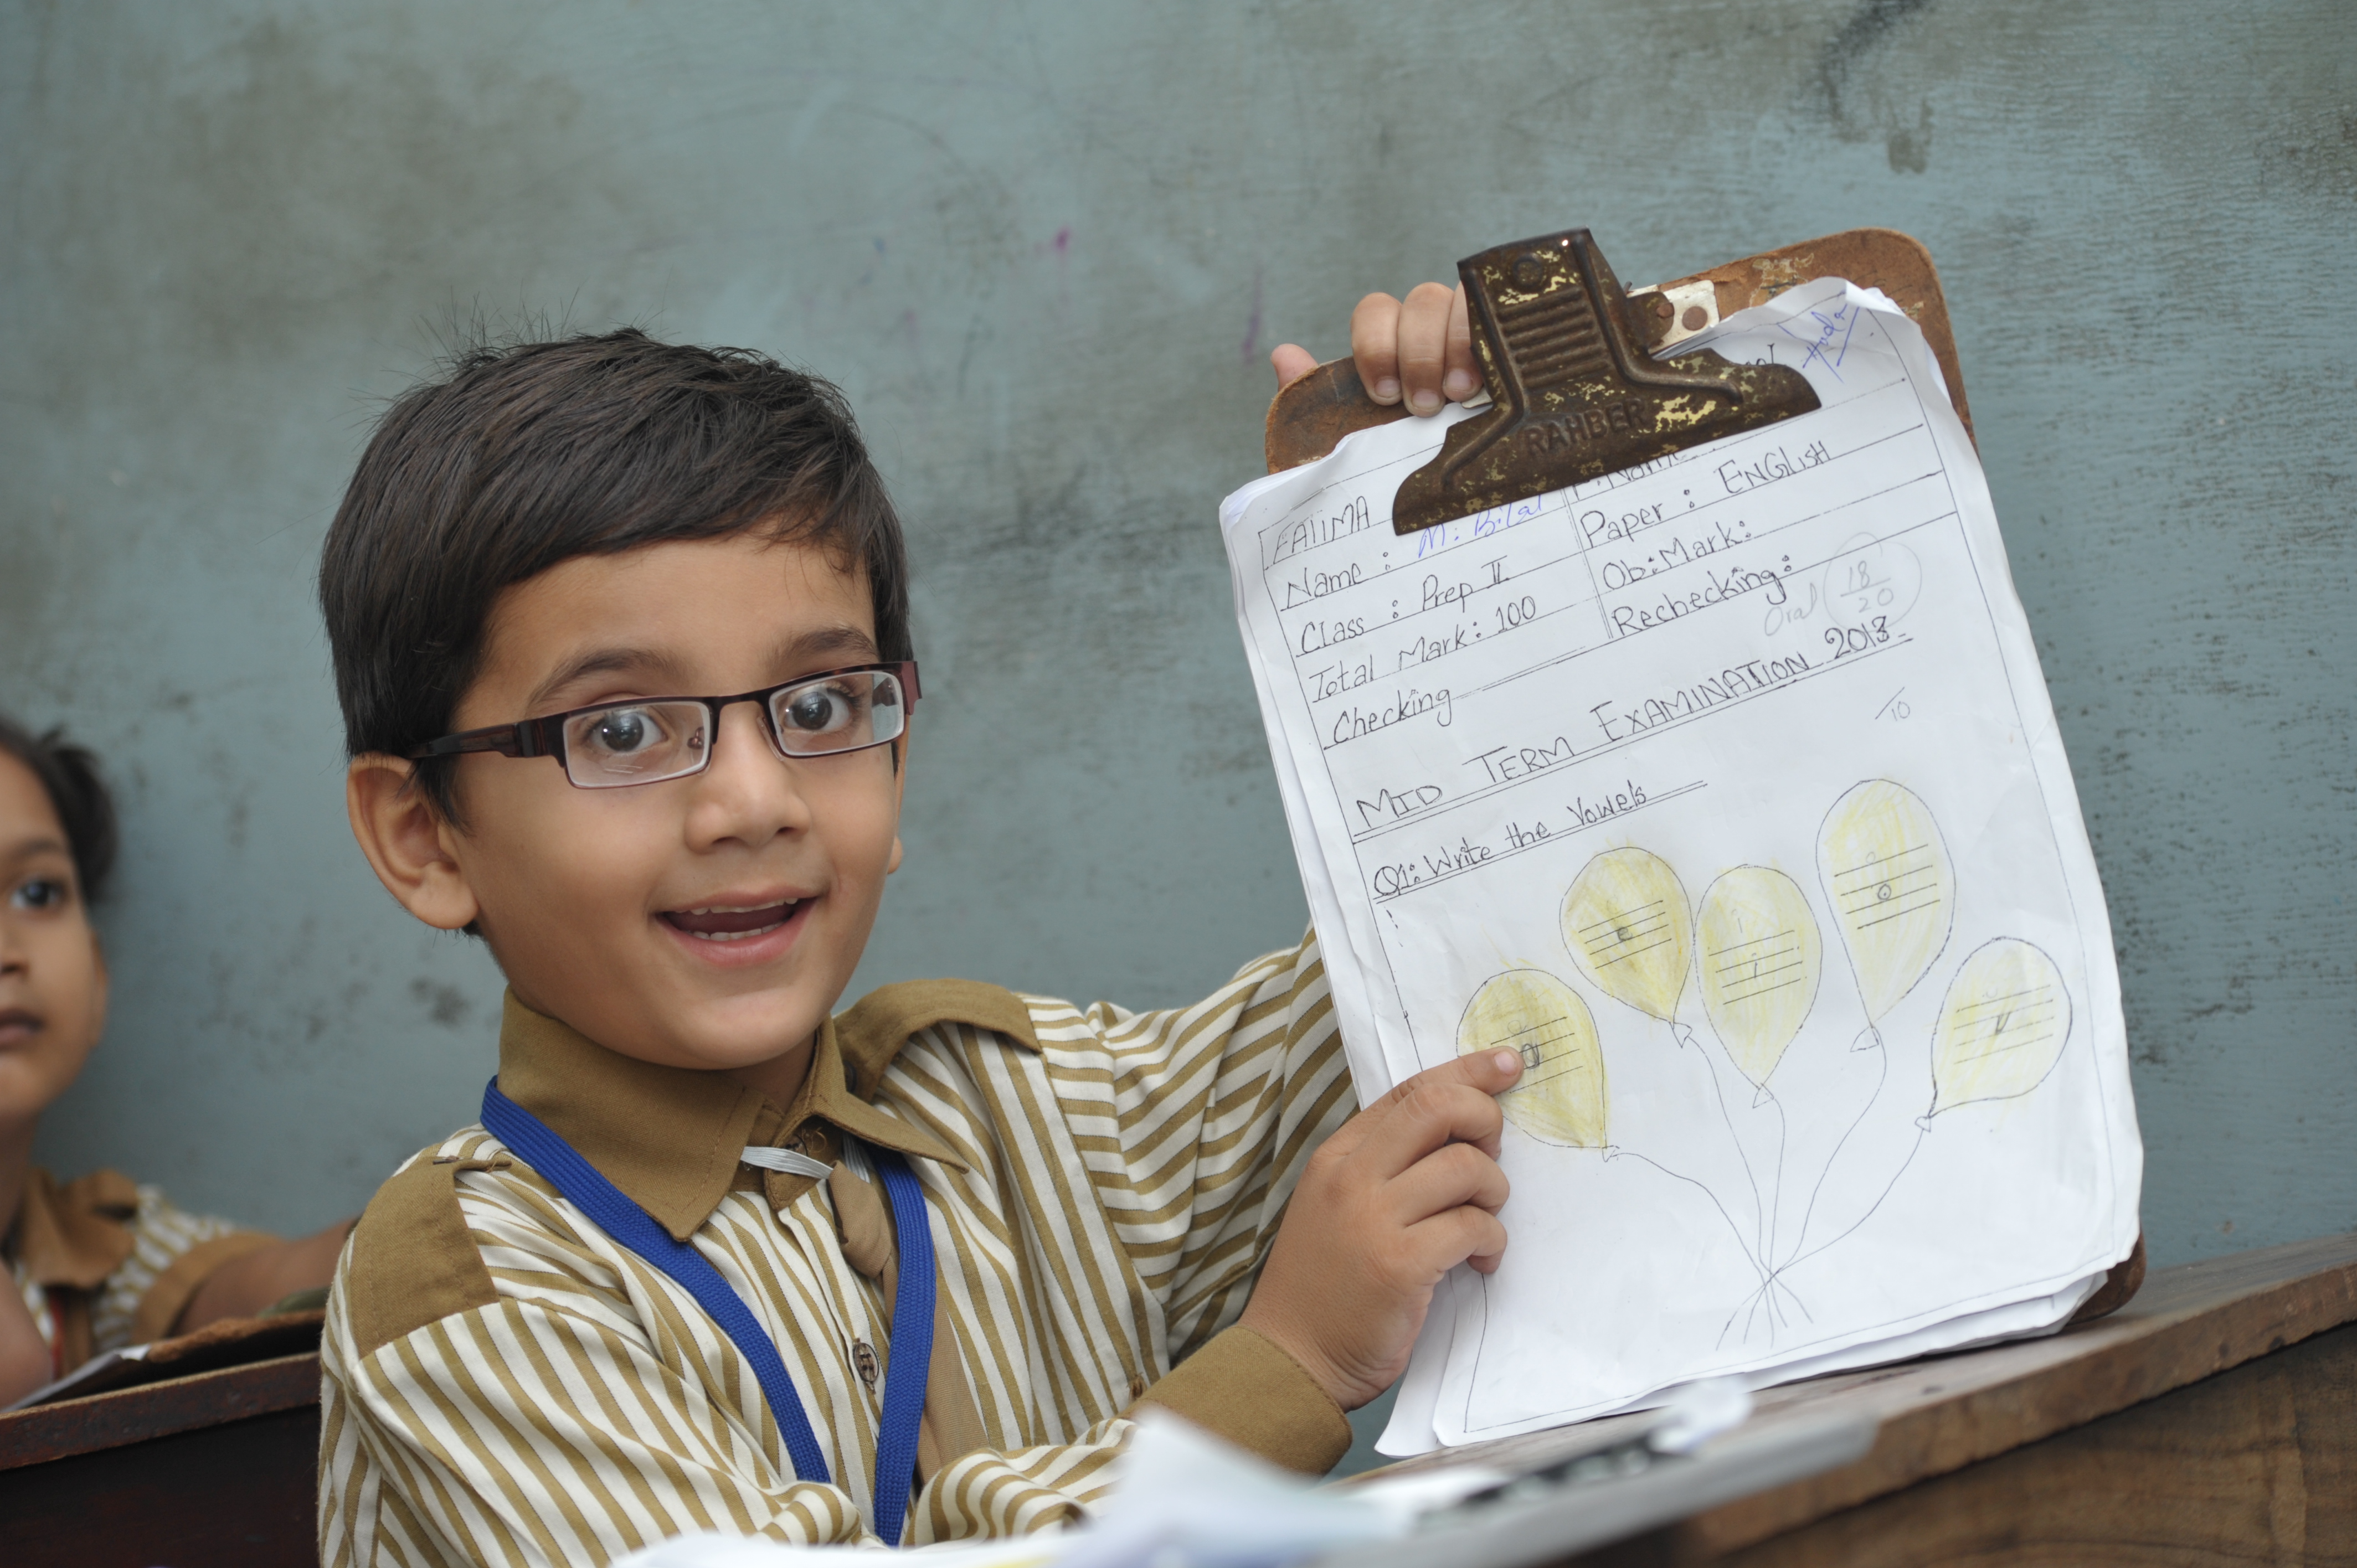 A child after vision correction as part of a school eye health programme. PAKISTAN. (c) BRIEN HOLDEN VISION INSTITUTE